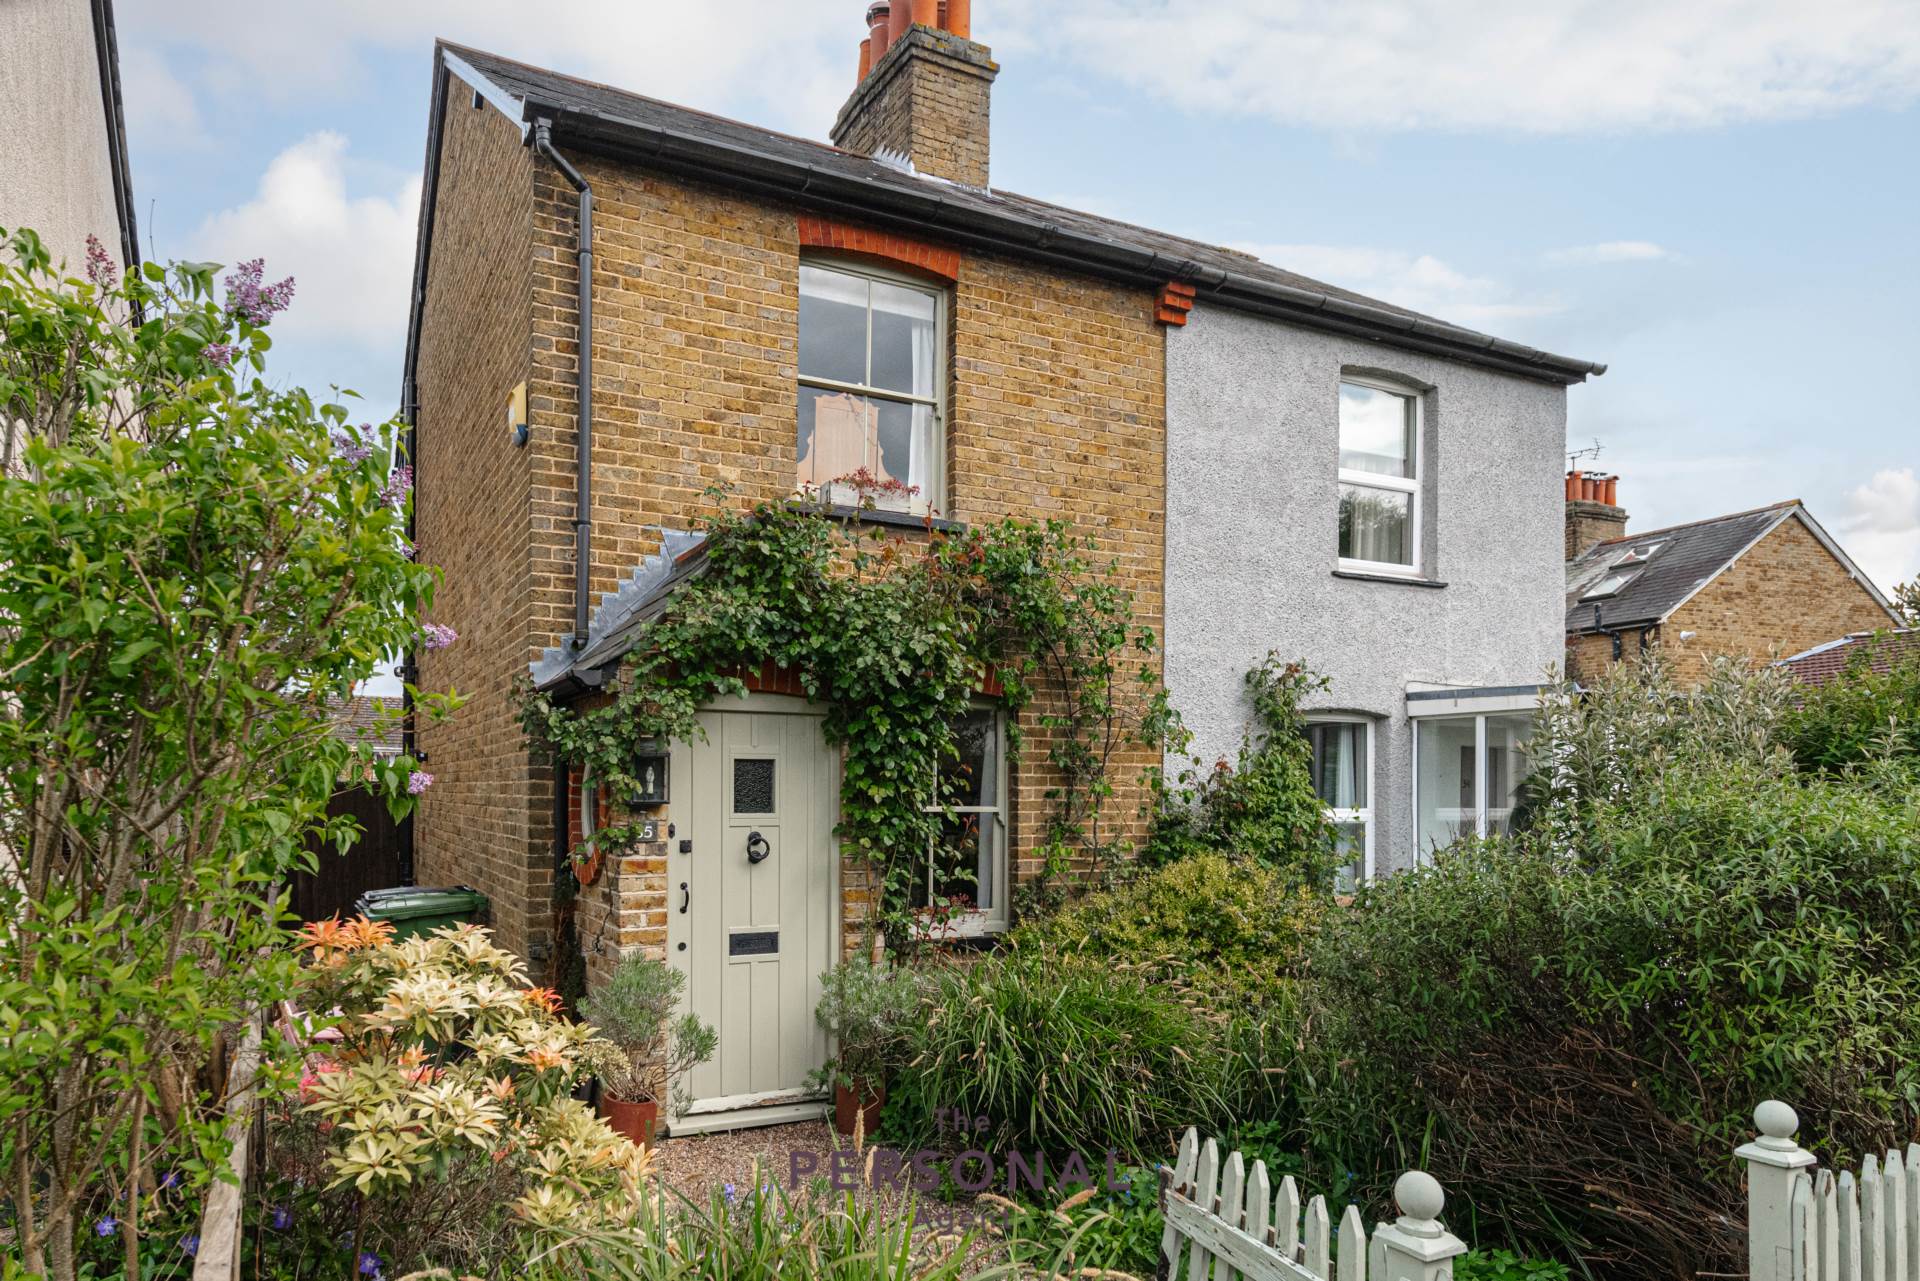 2 bed Semi-Detached House for rent in Epsom. From The Personal Agent - Epsom